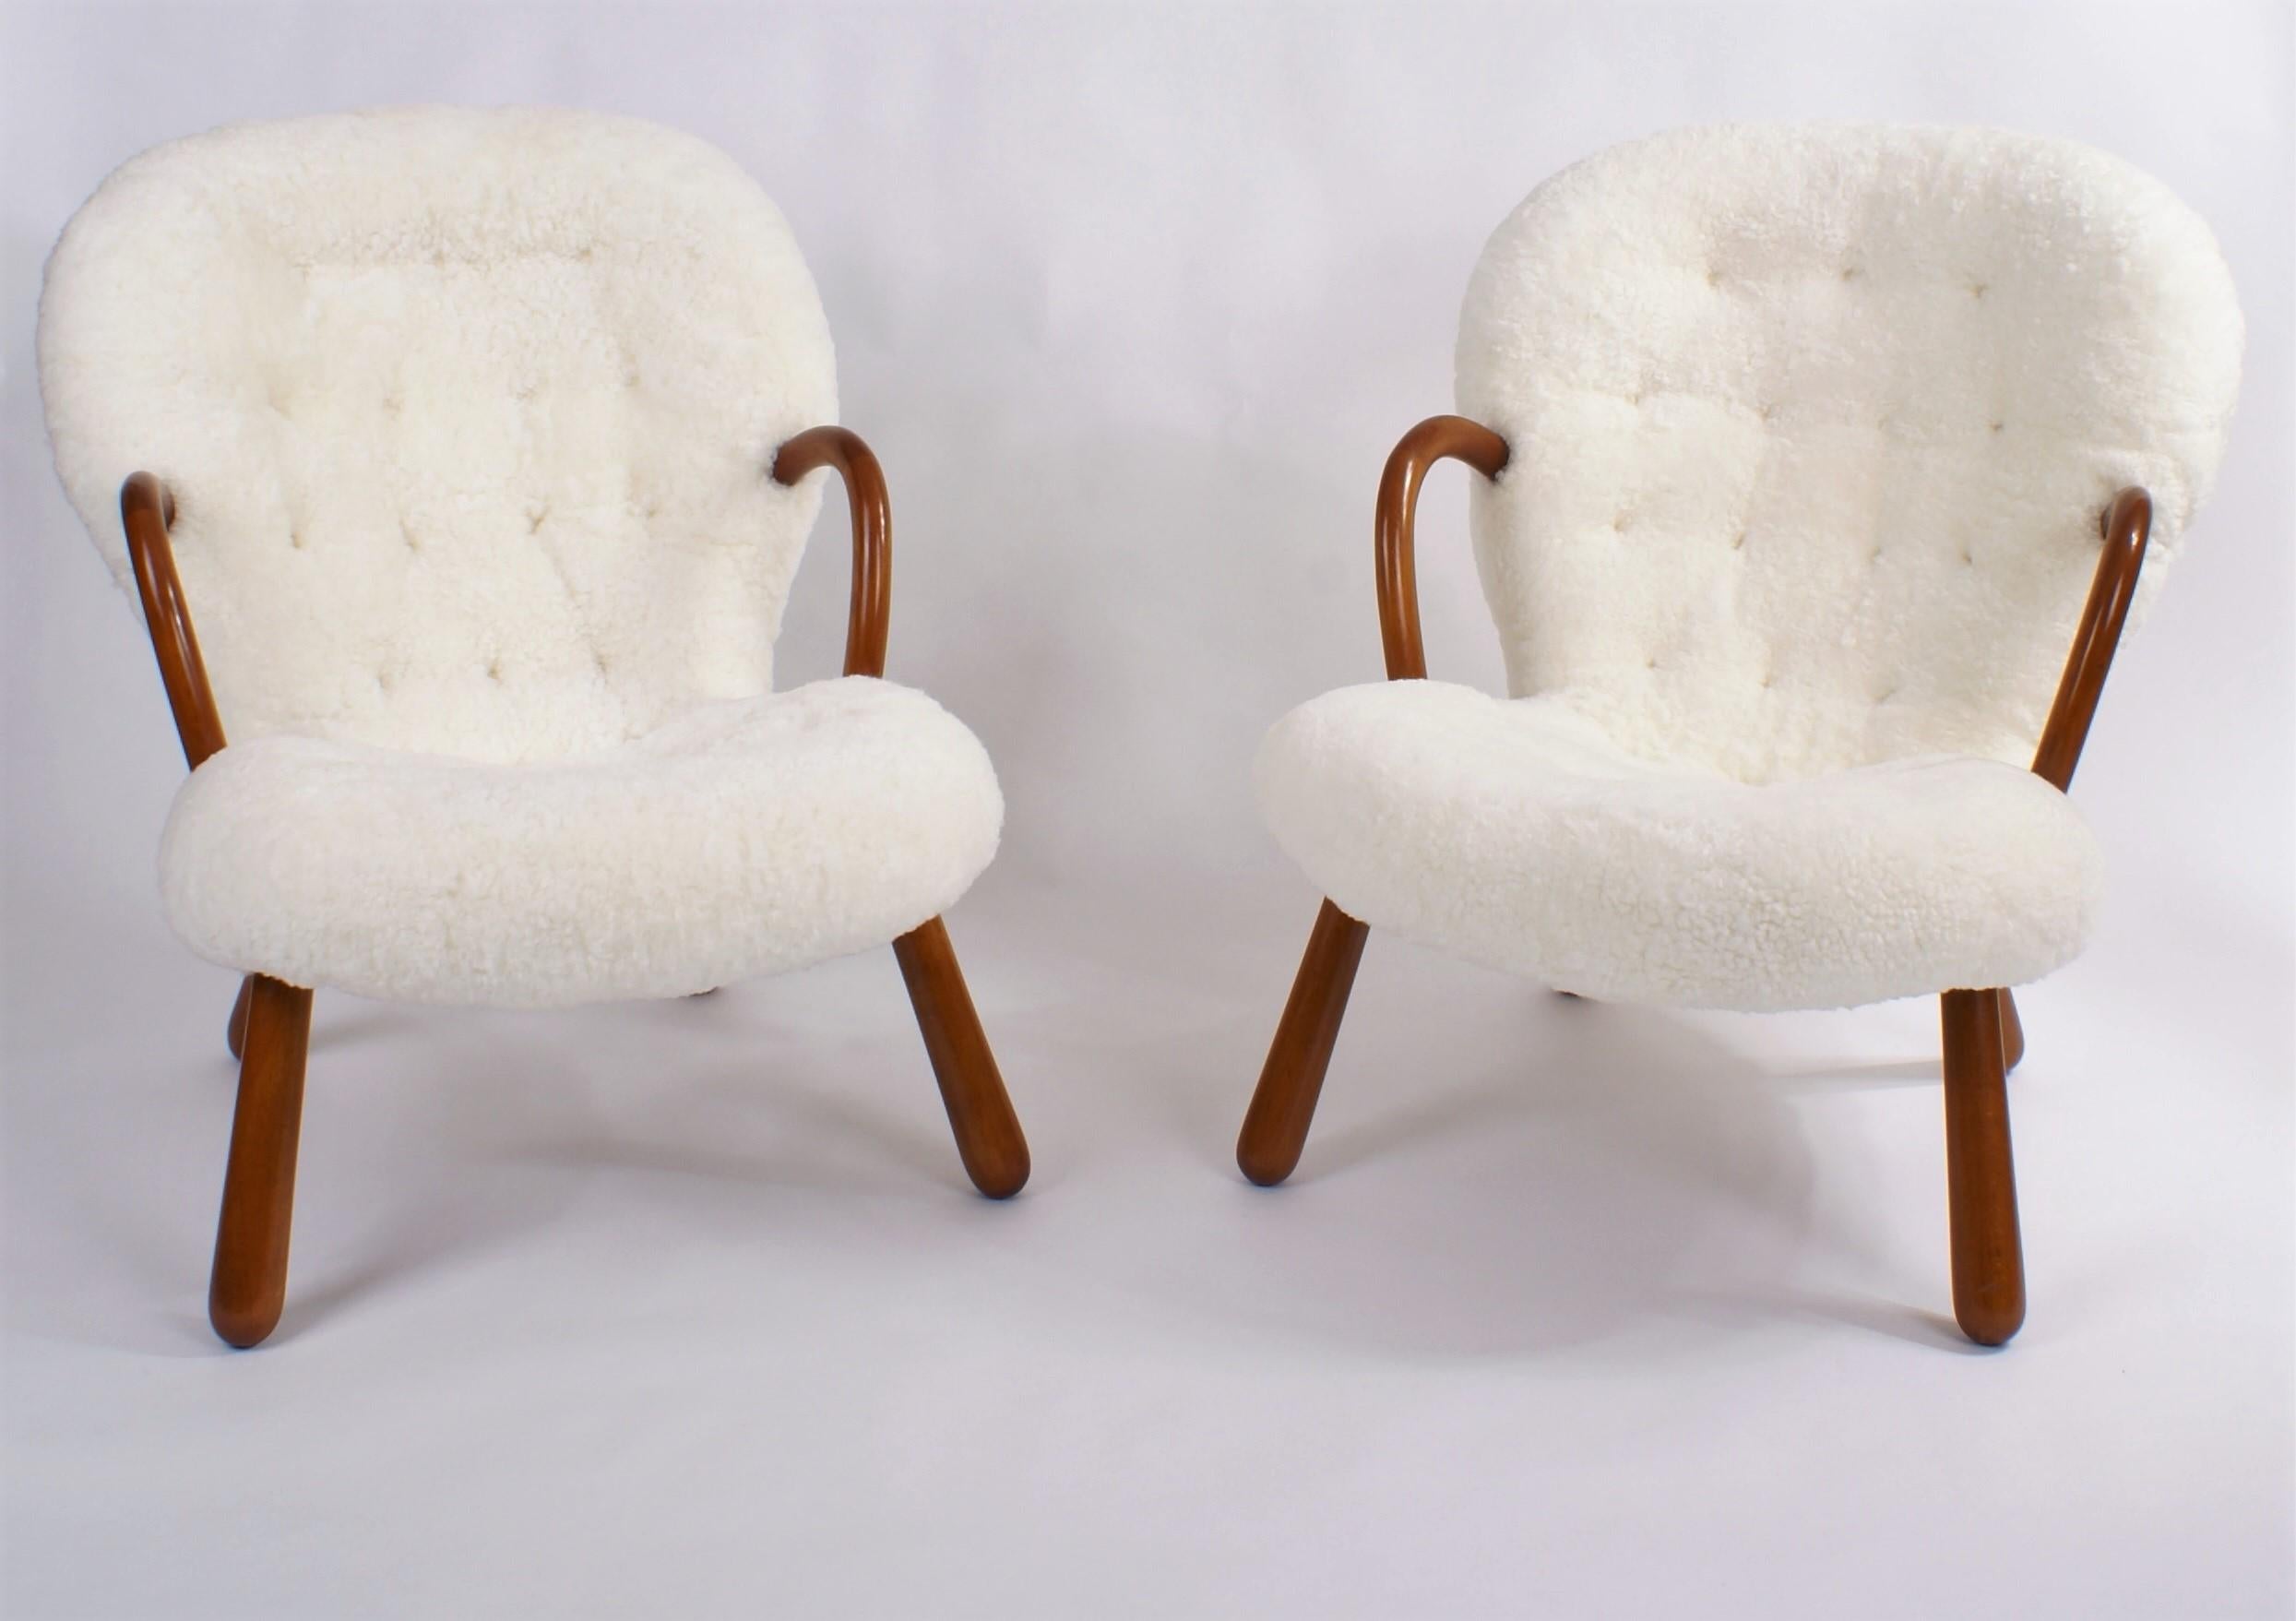 Pair of Philip Arctander 'clam' easy chairs in white sheepskin and legs in stained beech. Buttons in leather. Designed 1944. This pair is from the 1950s.

Price is for the pair.

 